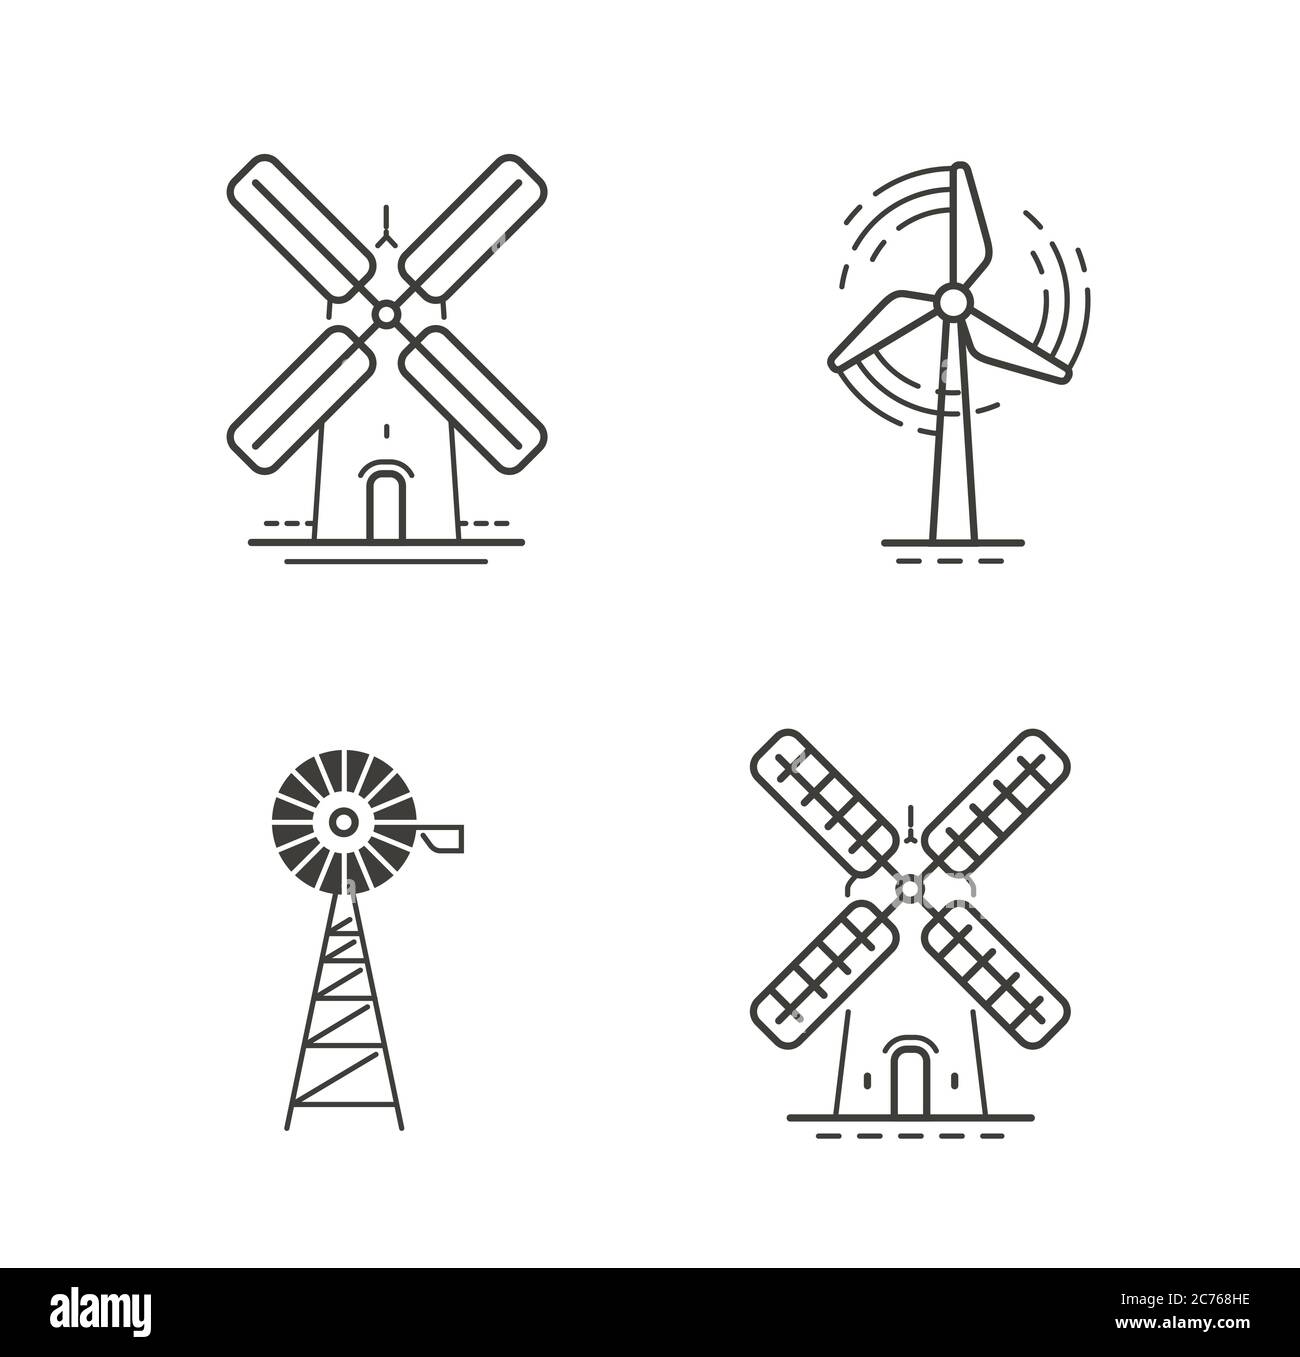 Set icons or symbols. Renewable energy, windmill, industry concept Stock Vector